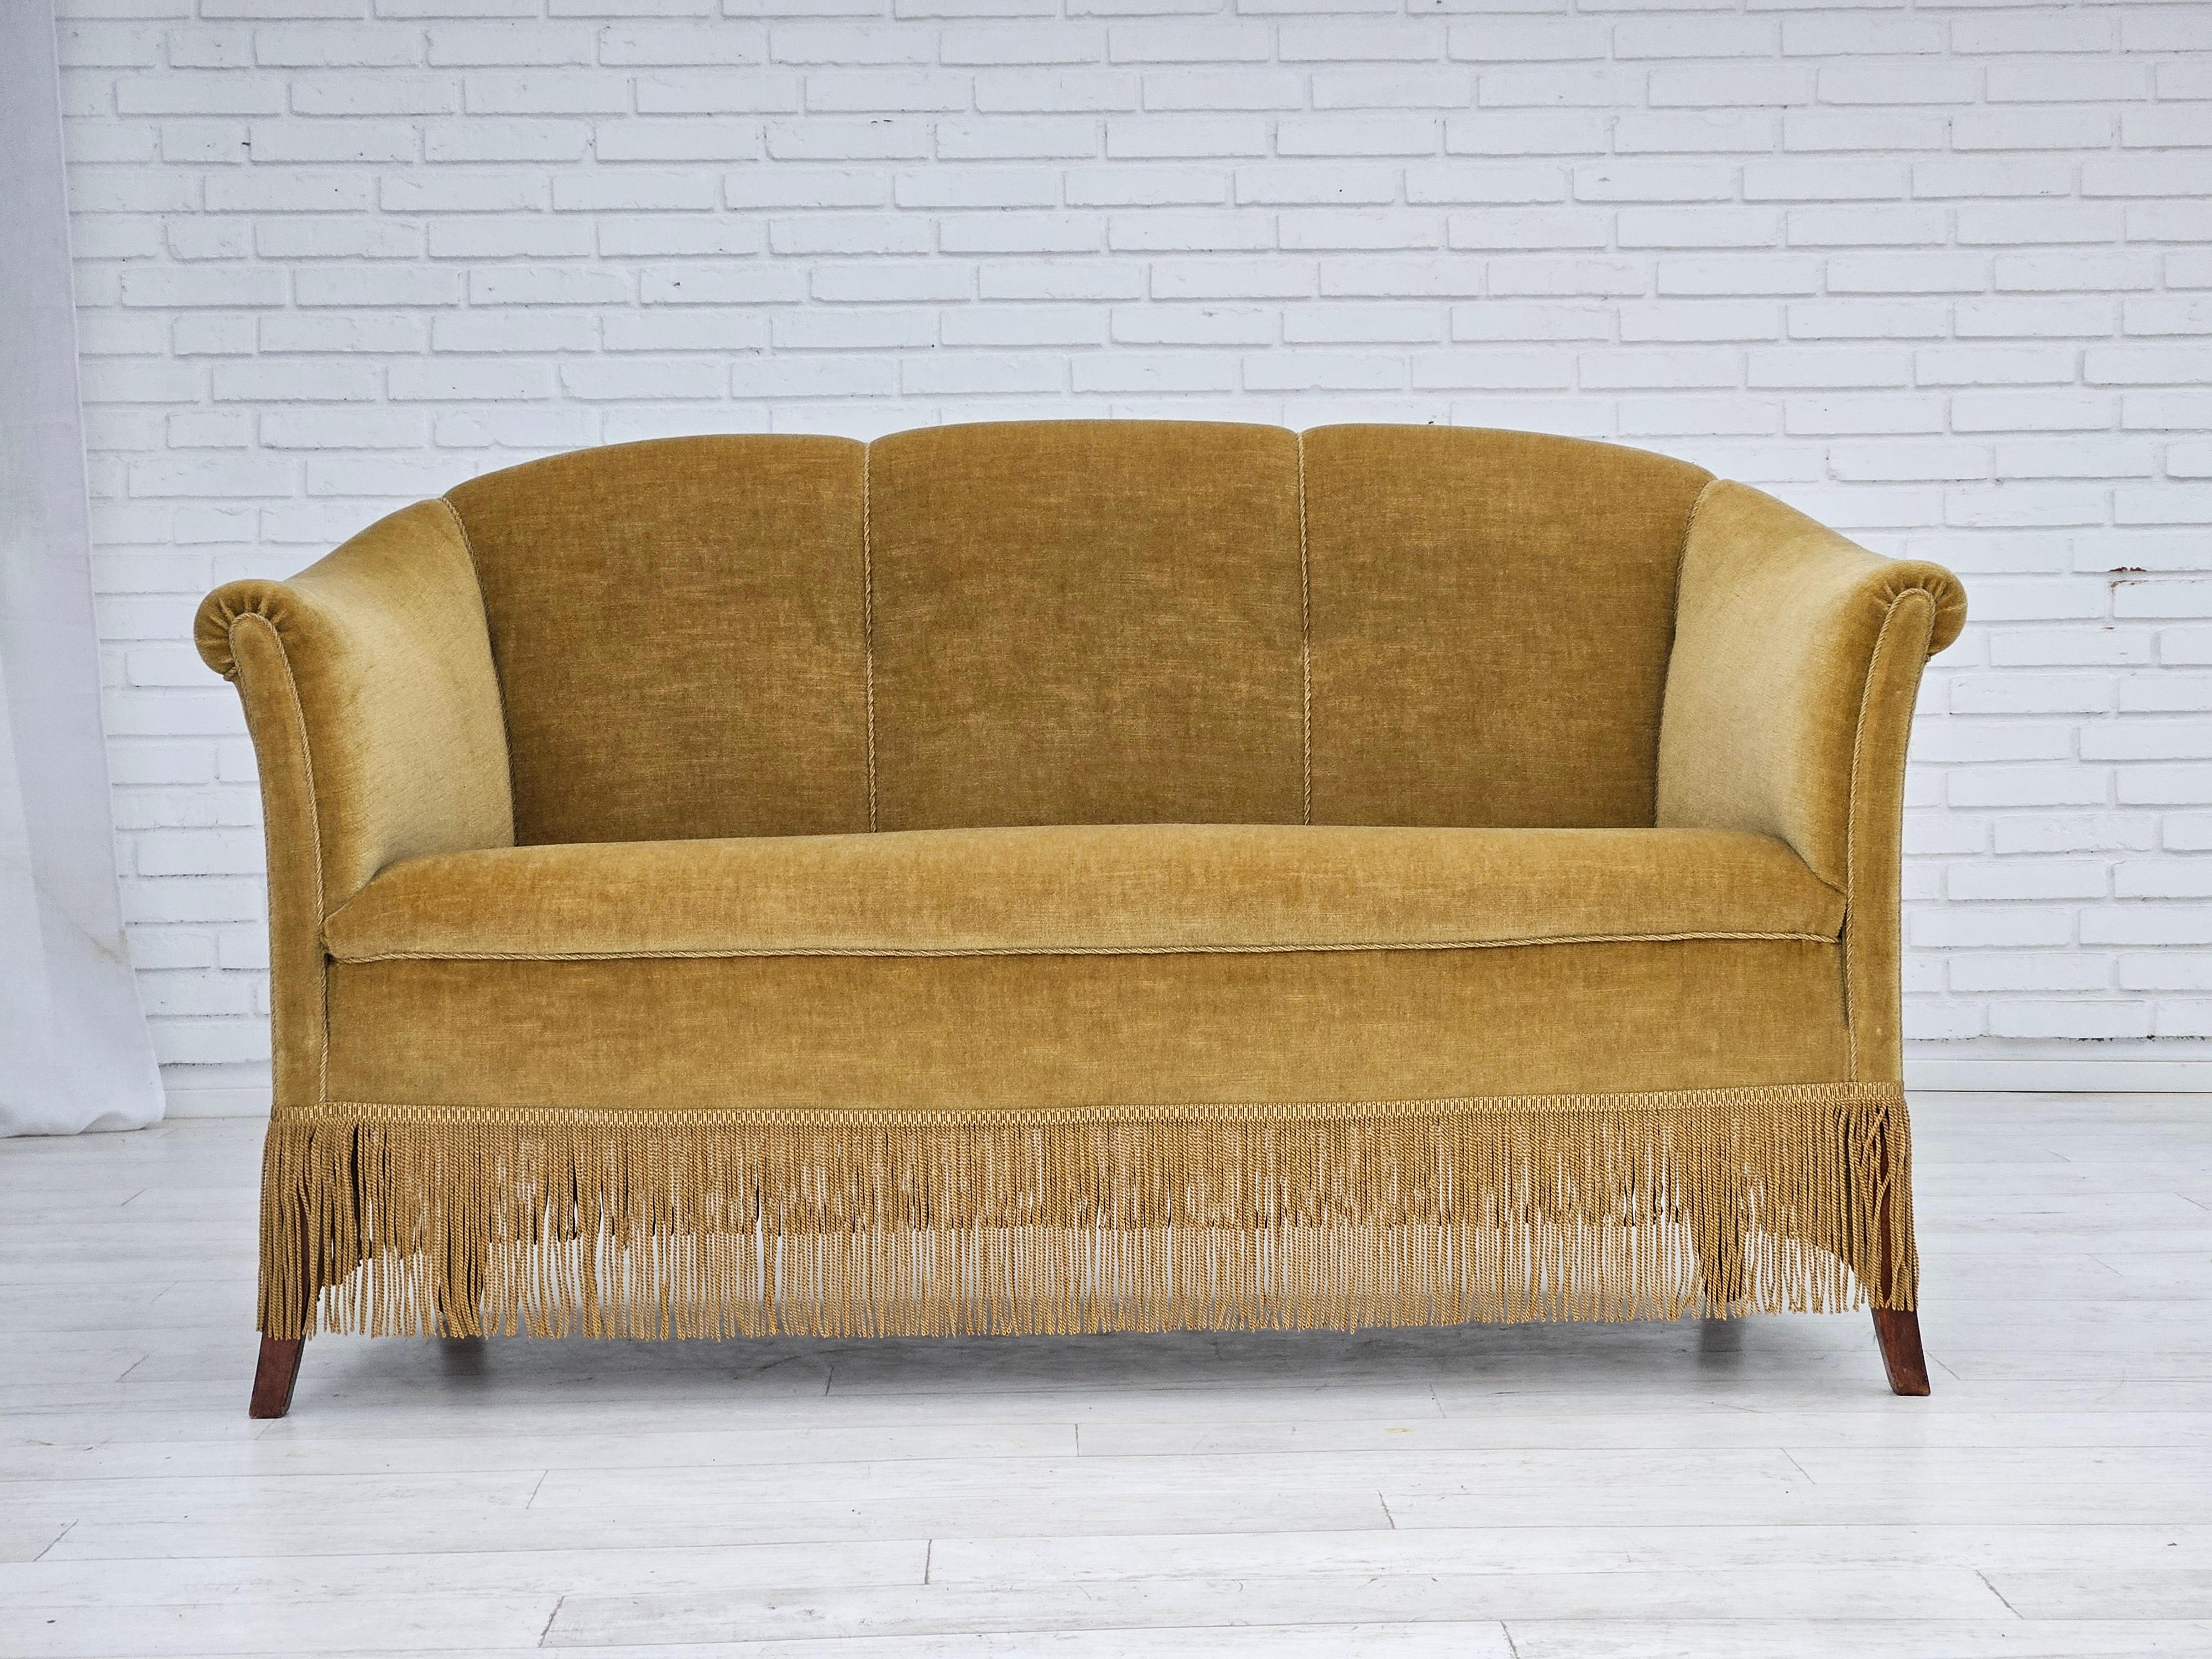 1960s, Danish 2 seater sofa in original very good condition: no smells and no stains. Green/yellow velour, beech wood legs. Springs in the seat. Manufactured by Danish furniture manufacturer in about 1955s.